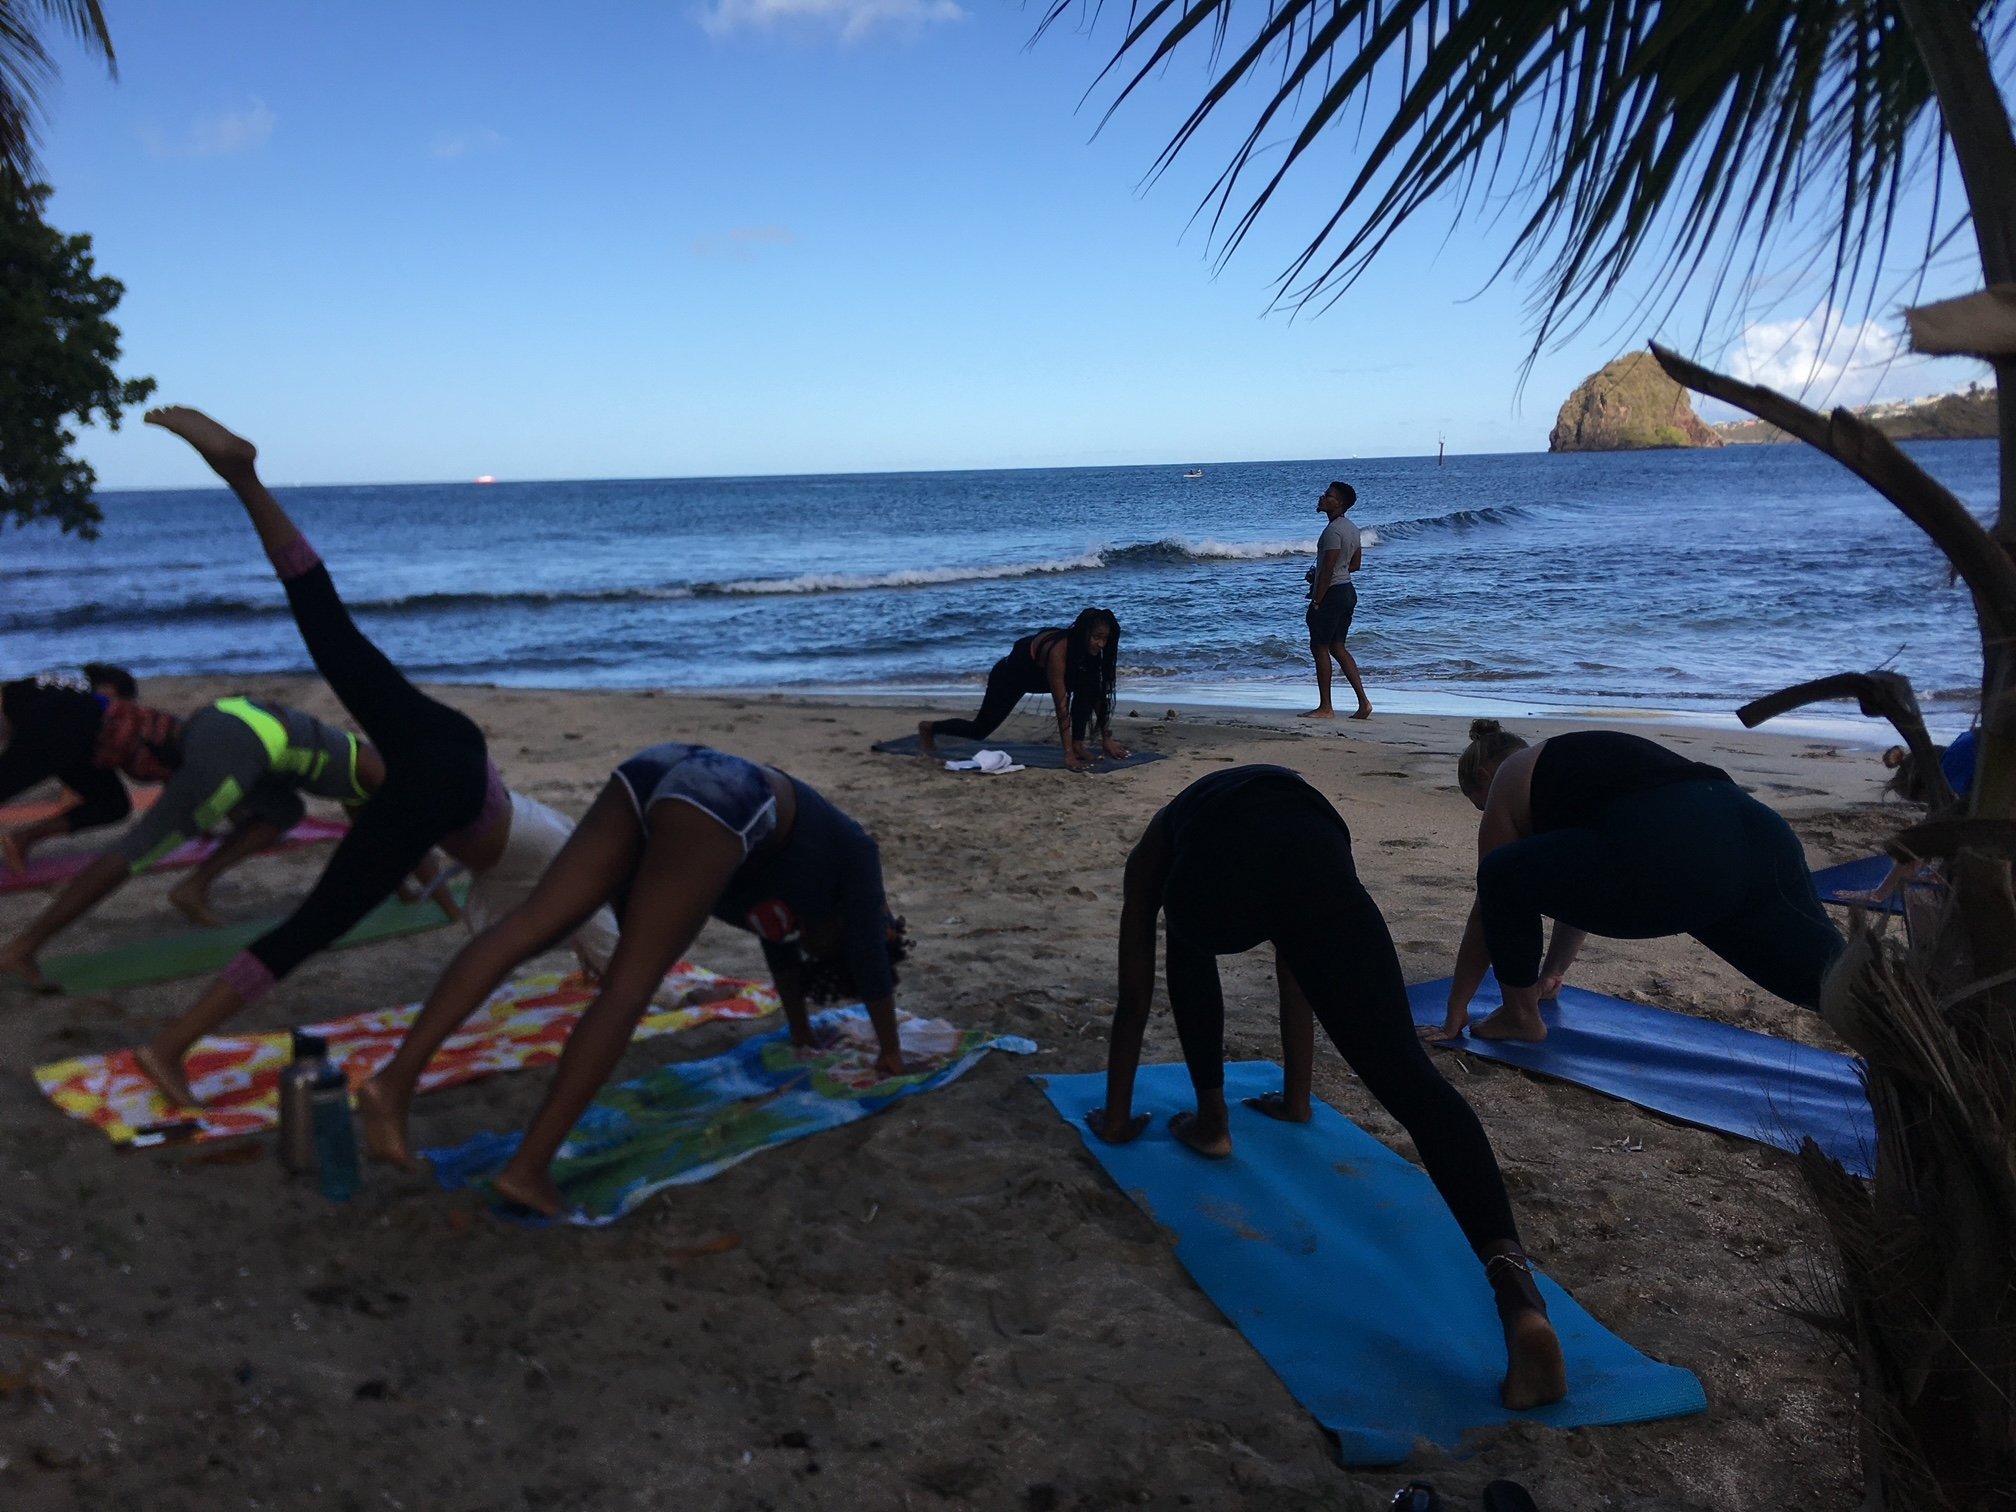 happy-brown-girl-on-the-beach-soka-gyal-march-14-2020-group-yoga-in-st-vincent-and-the-grenadines.JPG